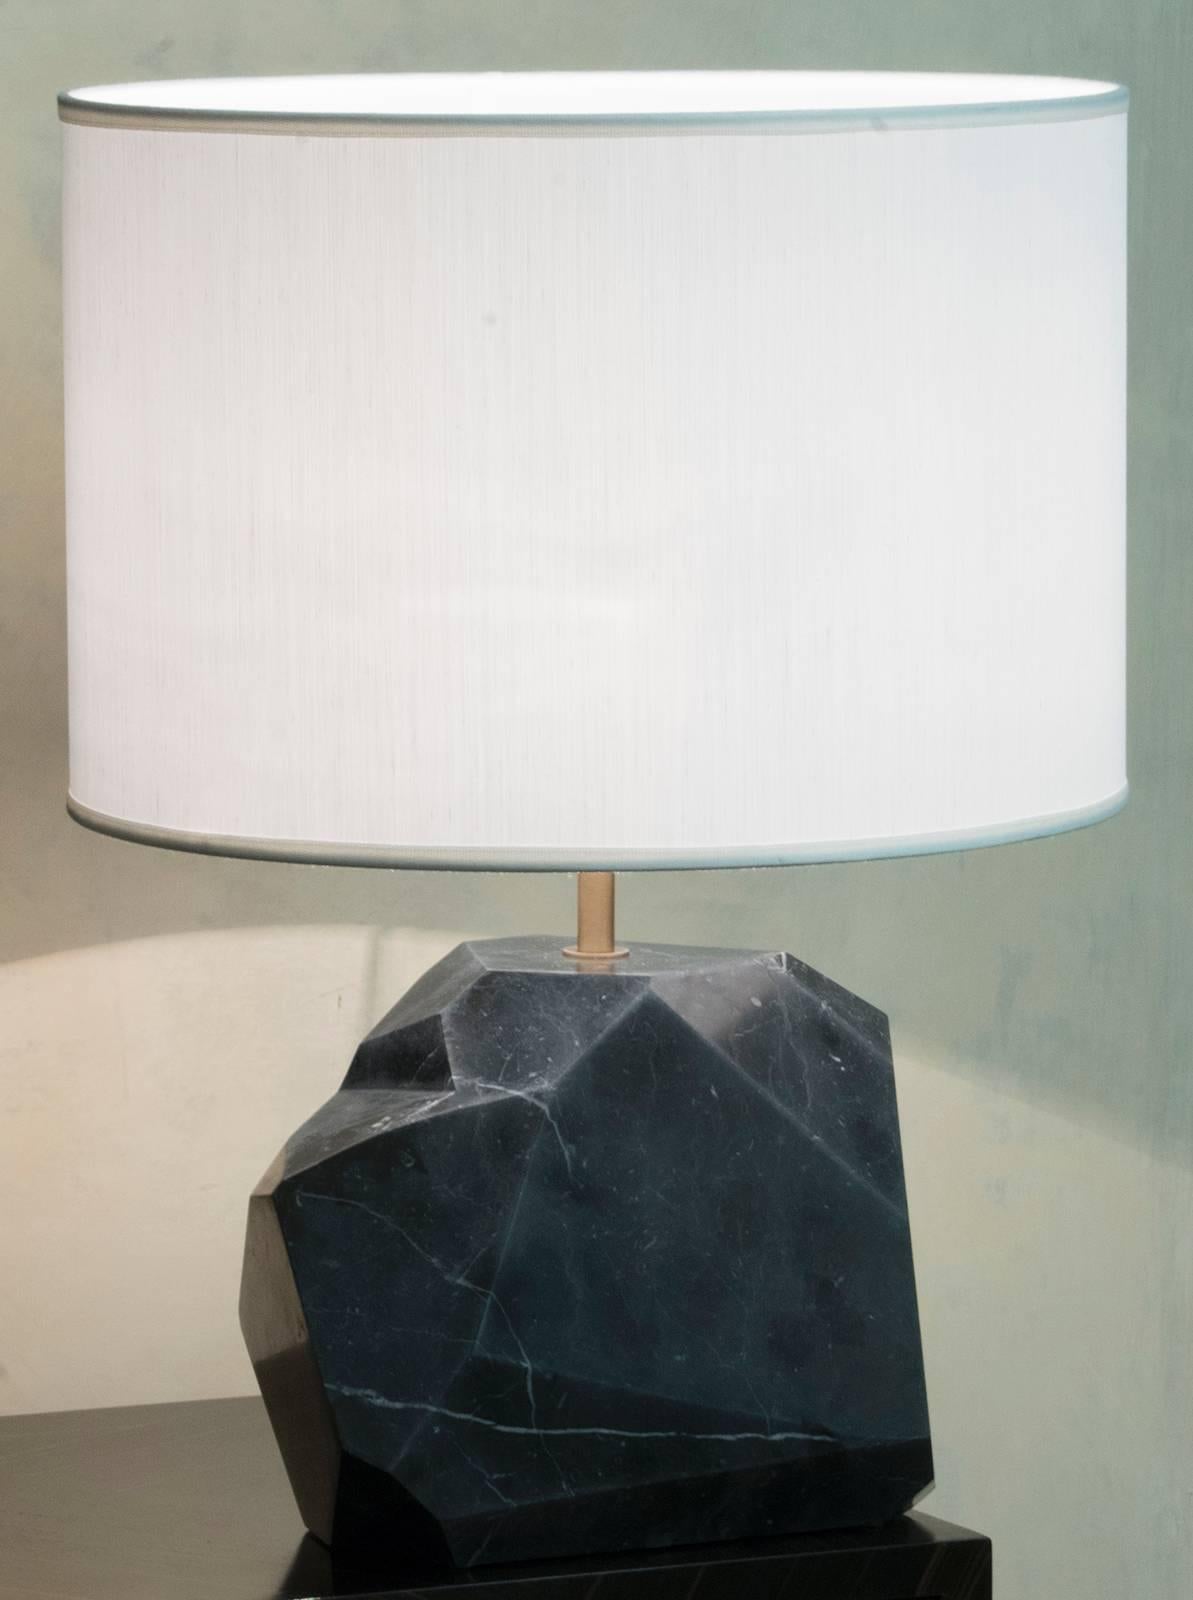 Sculptural Nero Marquinia marble lamp with mat finish that gives the lamp a vintage look, natural brass details, silk shantung lampshade cm 45 x H 30.